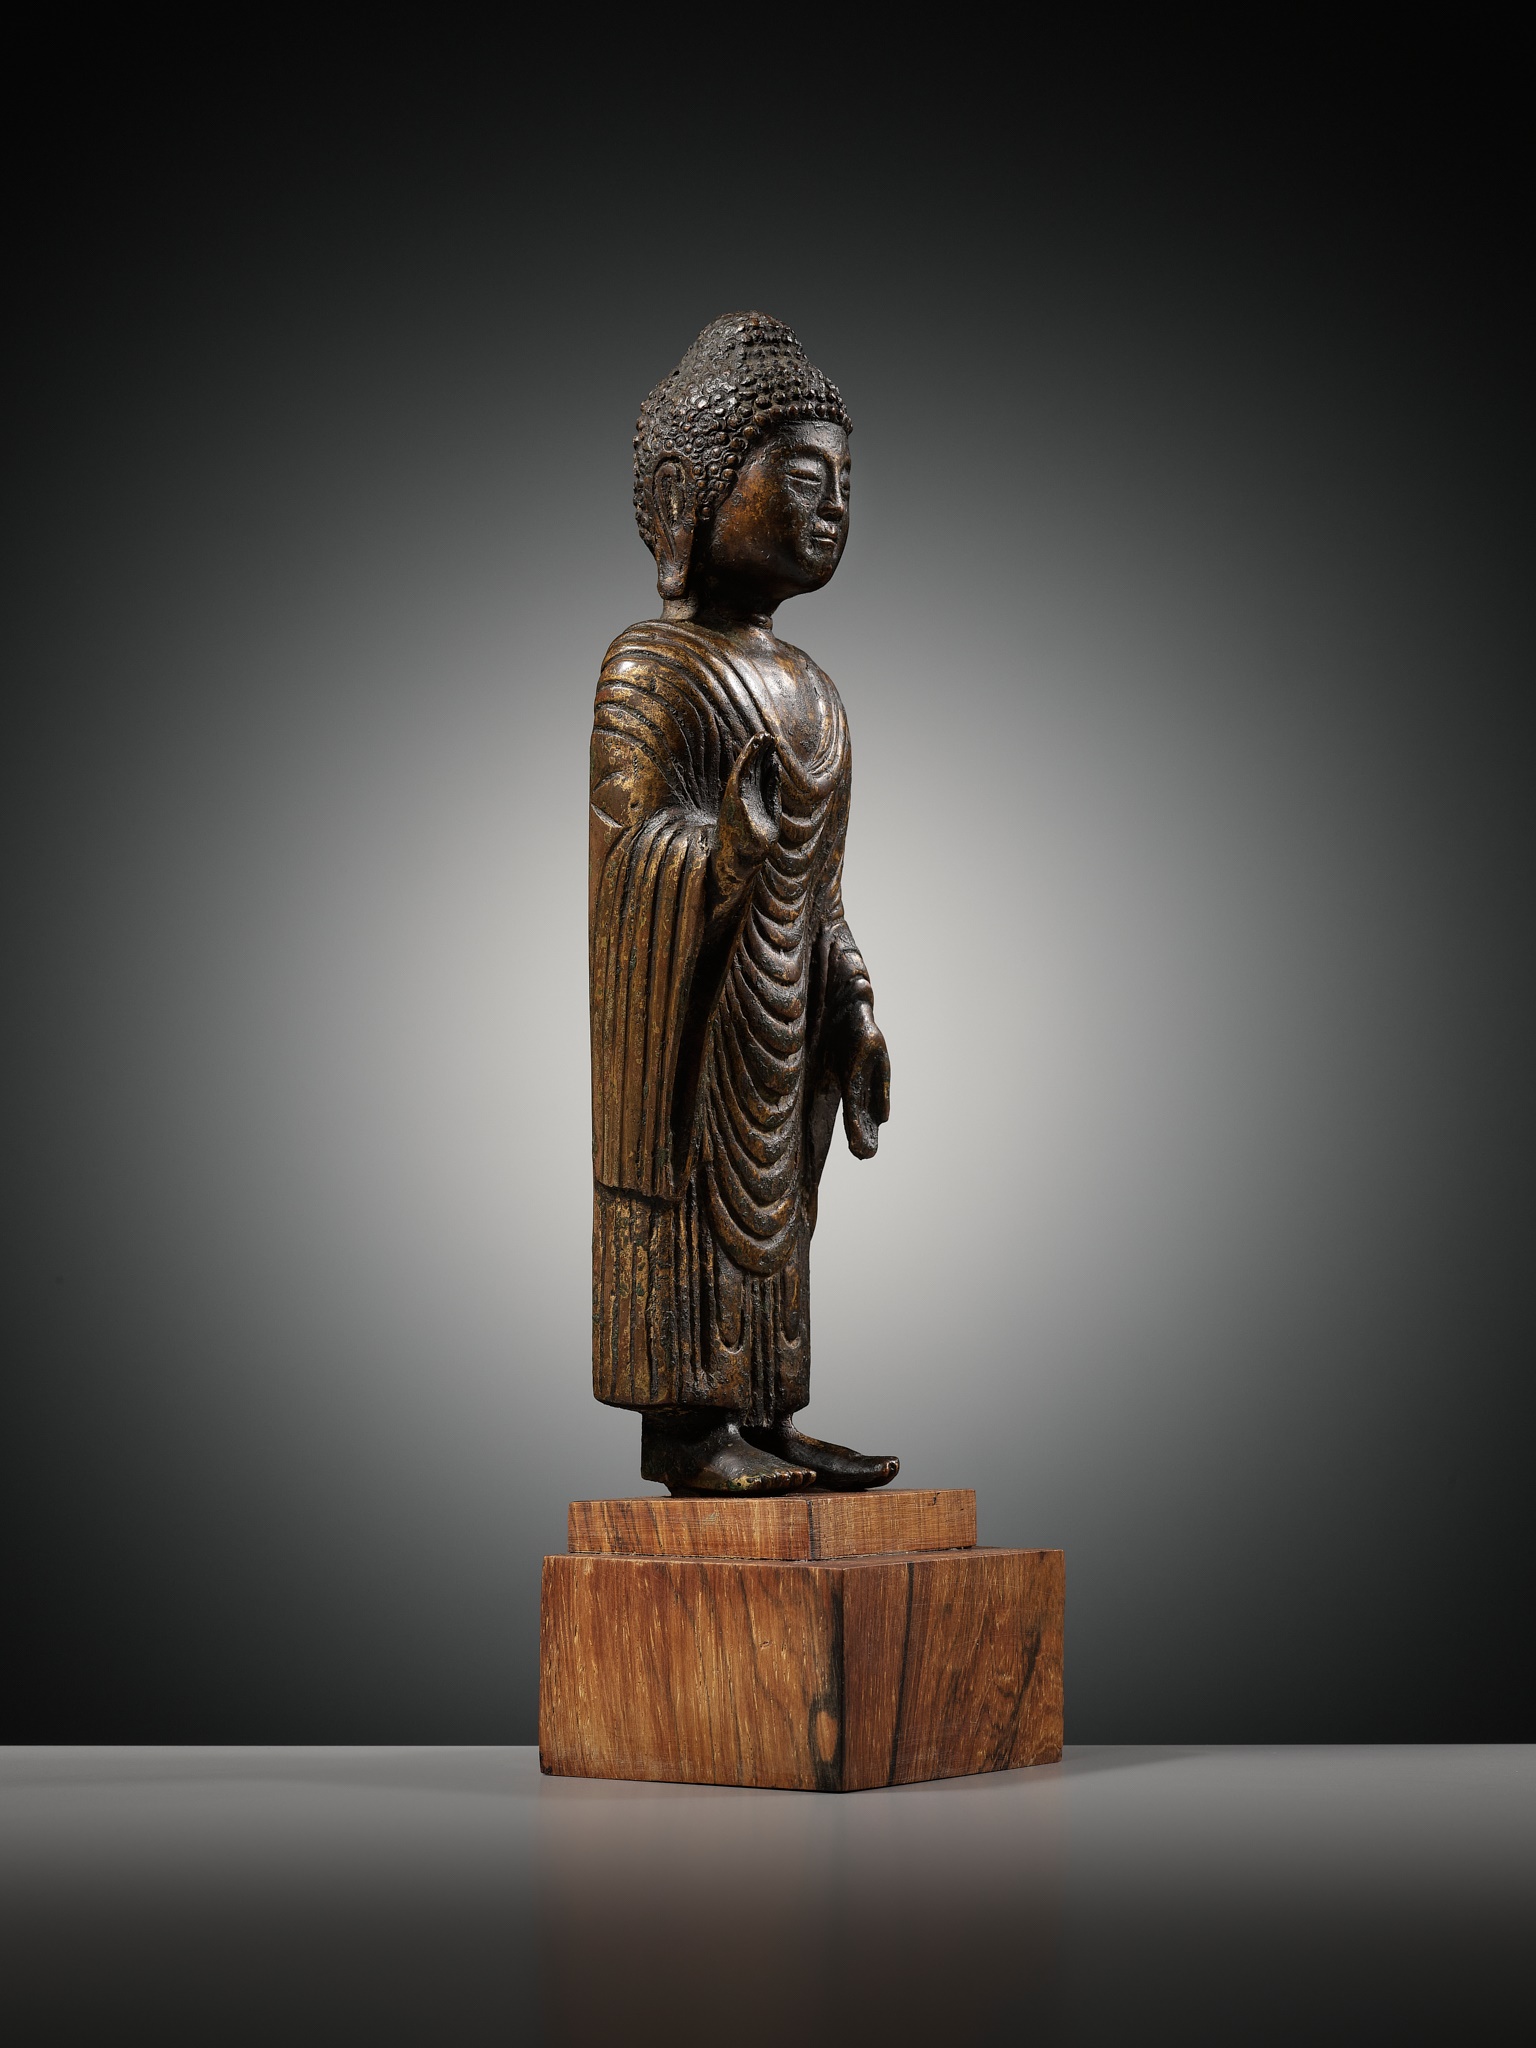 A GILT-BRONZE STANDING FIGURE OF BUDDHA, UNIFIED SILLA DYNASTY, KOREA, 8TH - 9TH CENTURY - Image 10 of 12